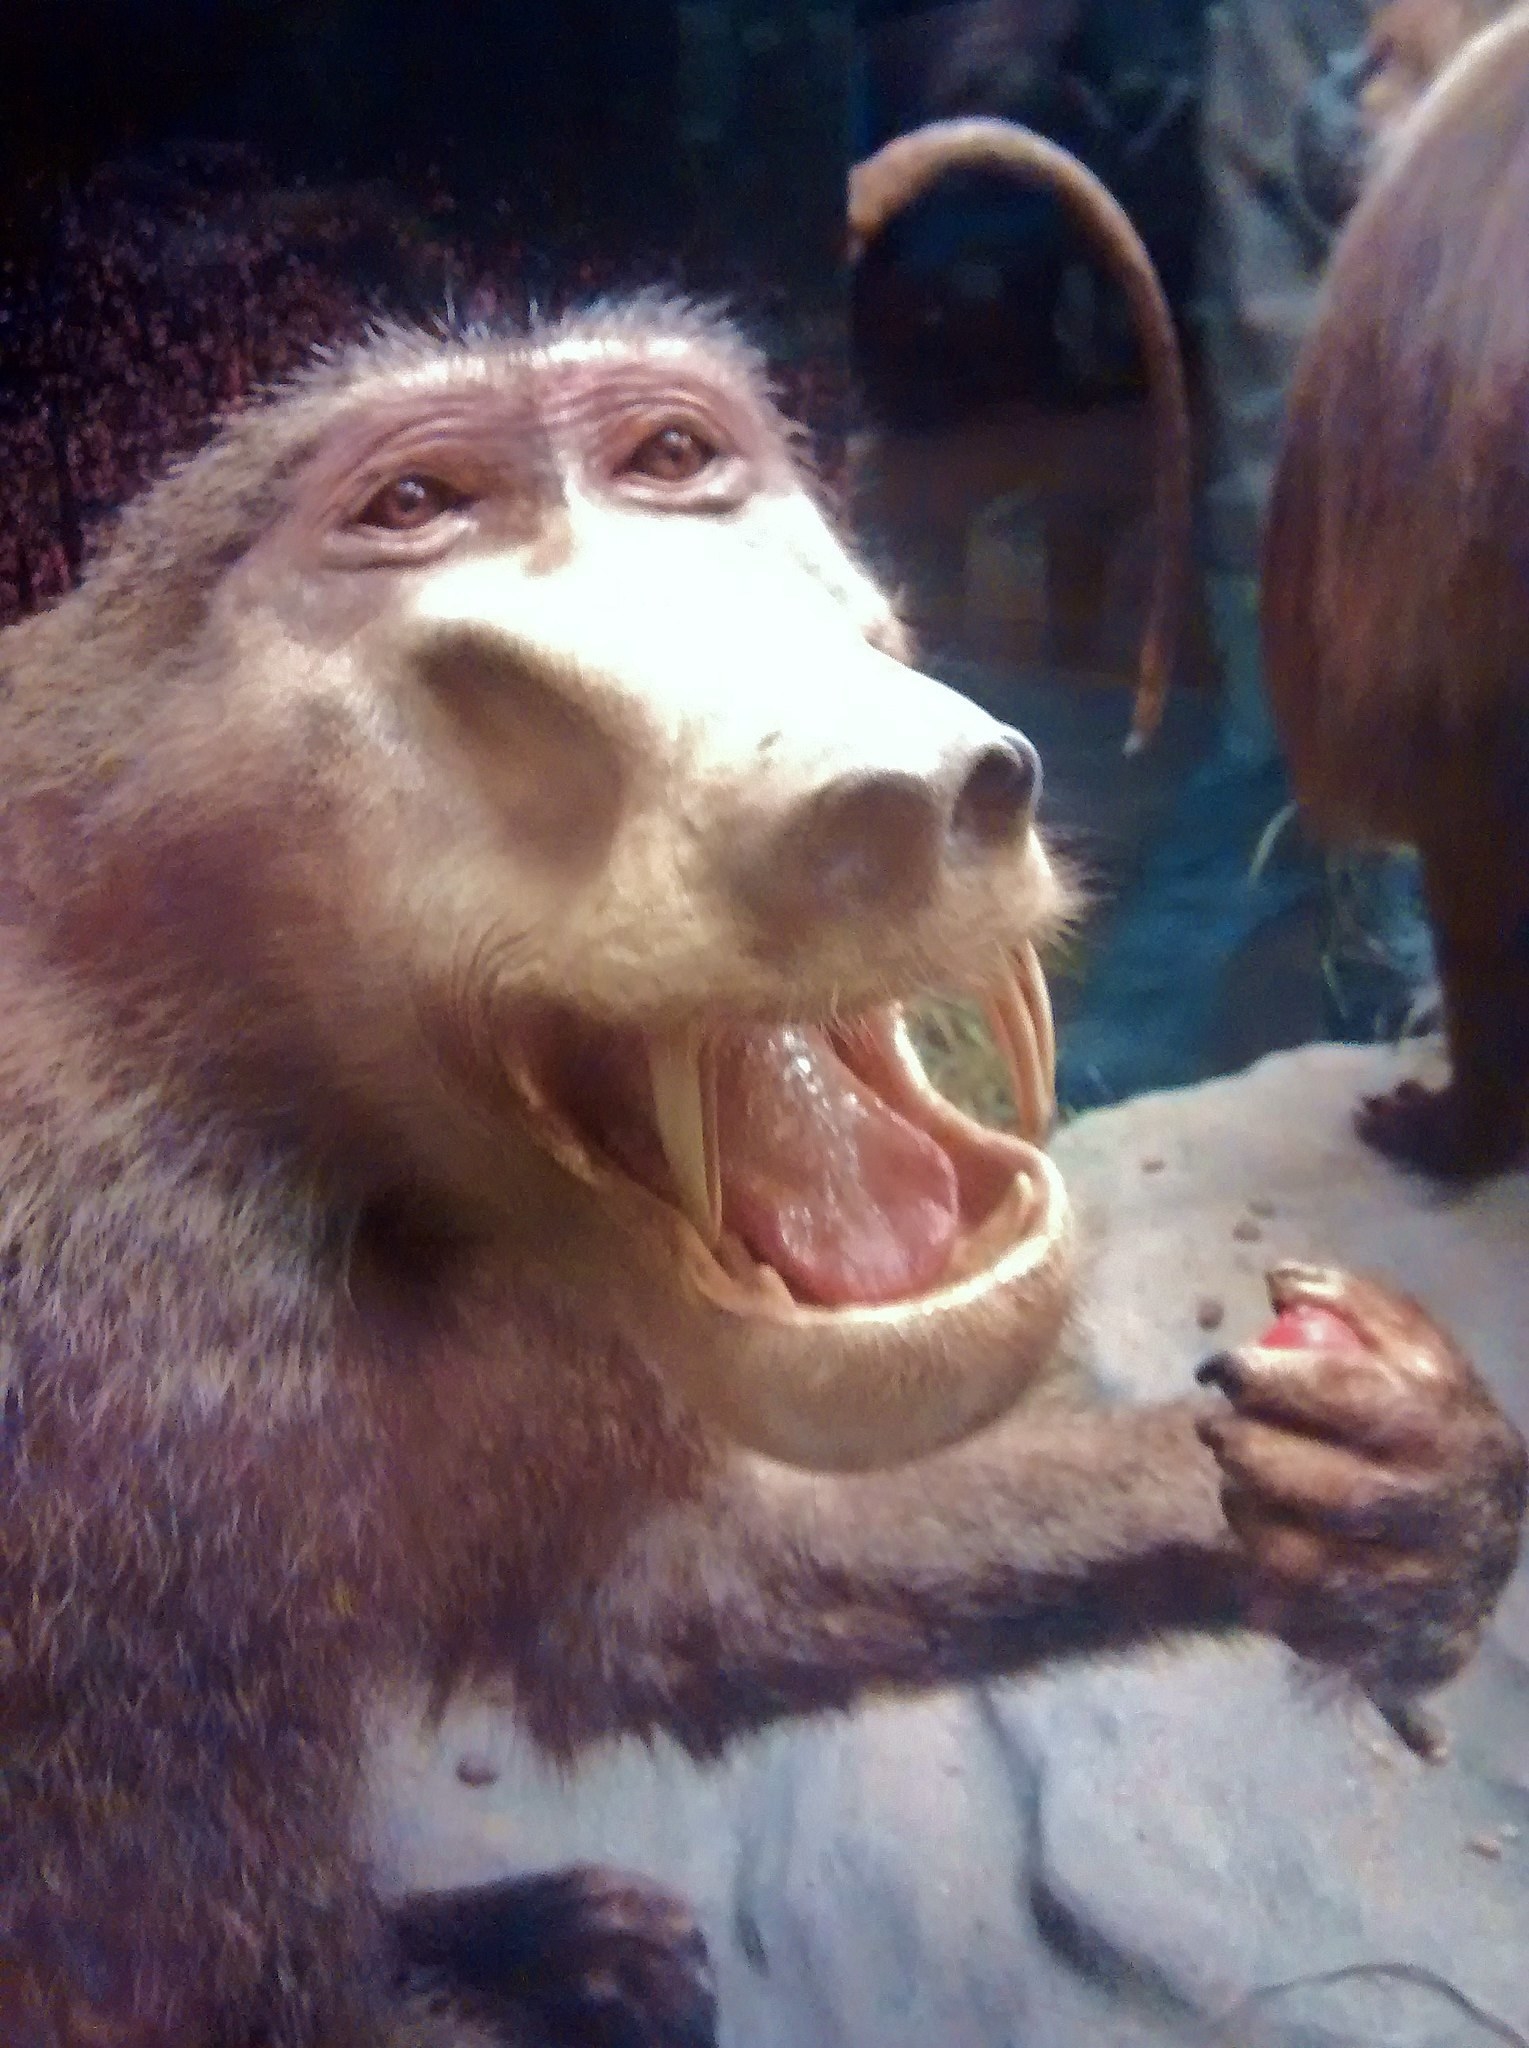 Wide mouthed baboon with huge teeth.